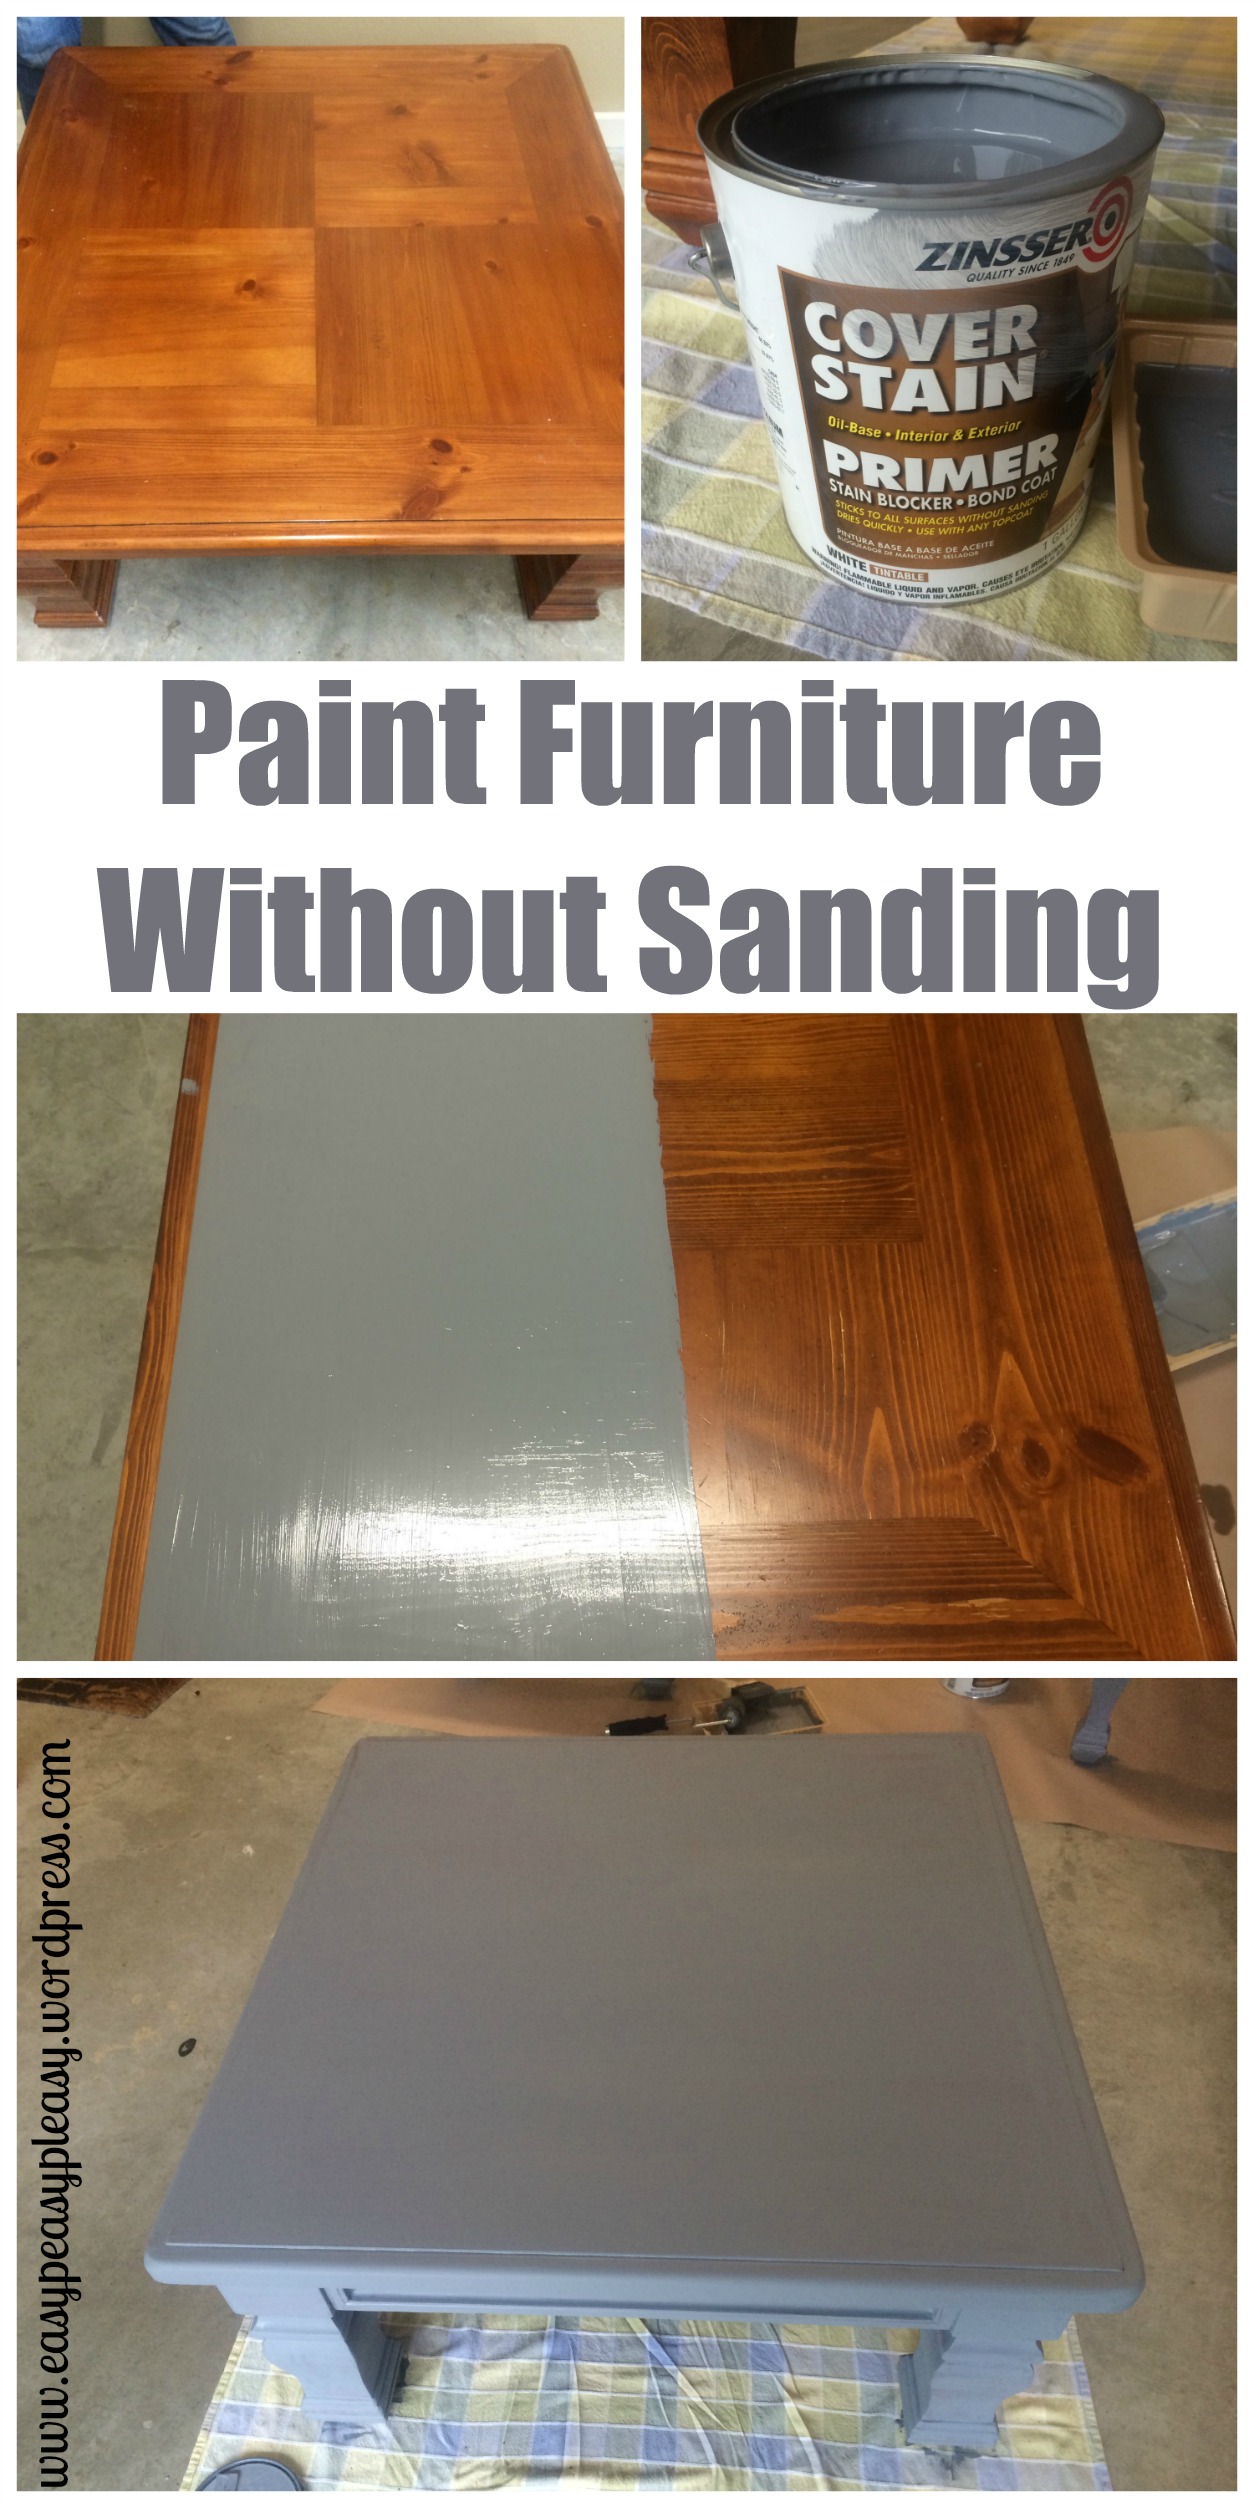 How to paint wood furniture without sanding first.